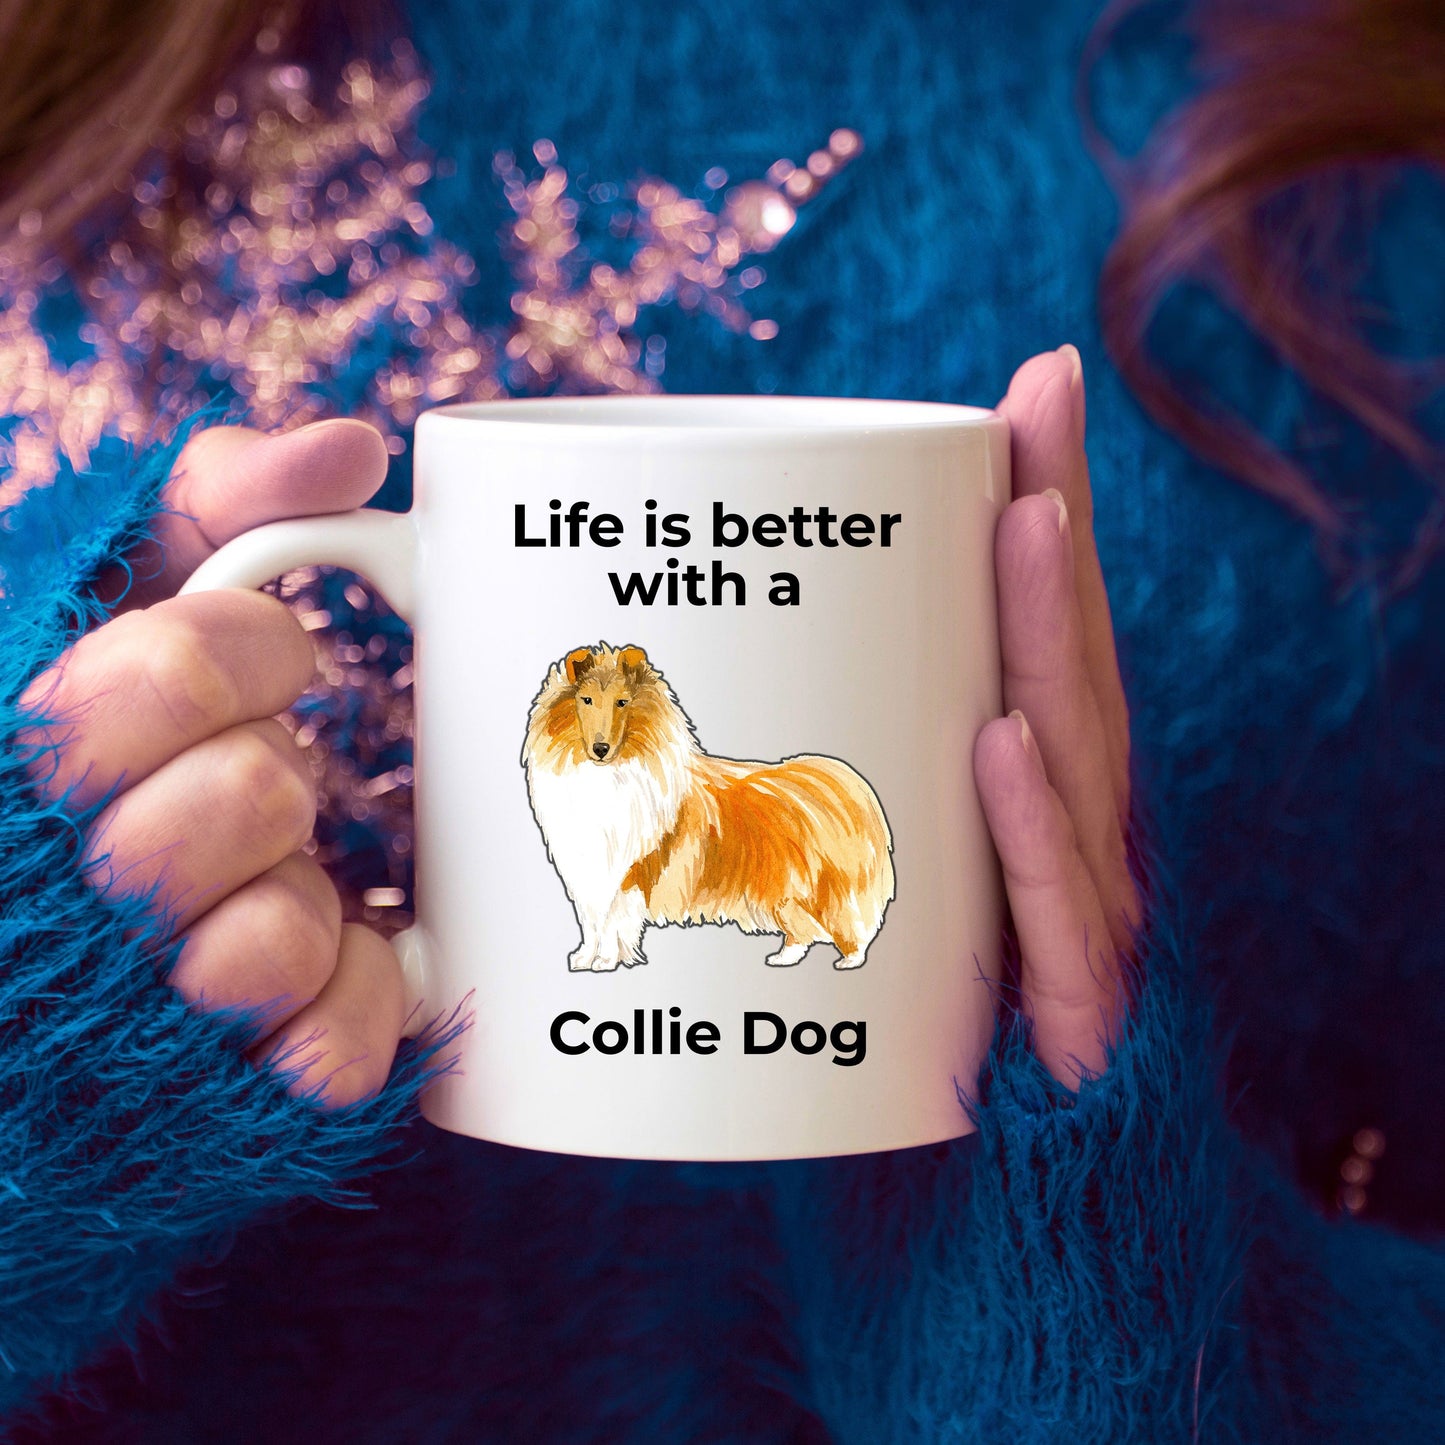 Collie Dog Lover Coffee Mug Life is better with a Collie Dog